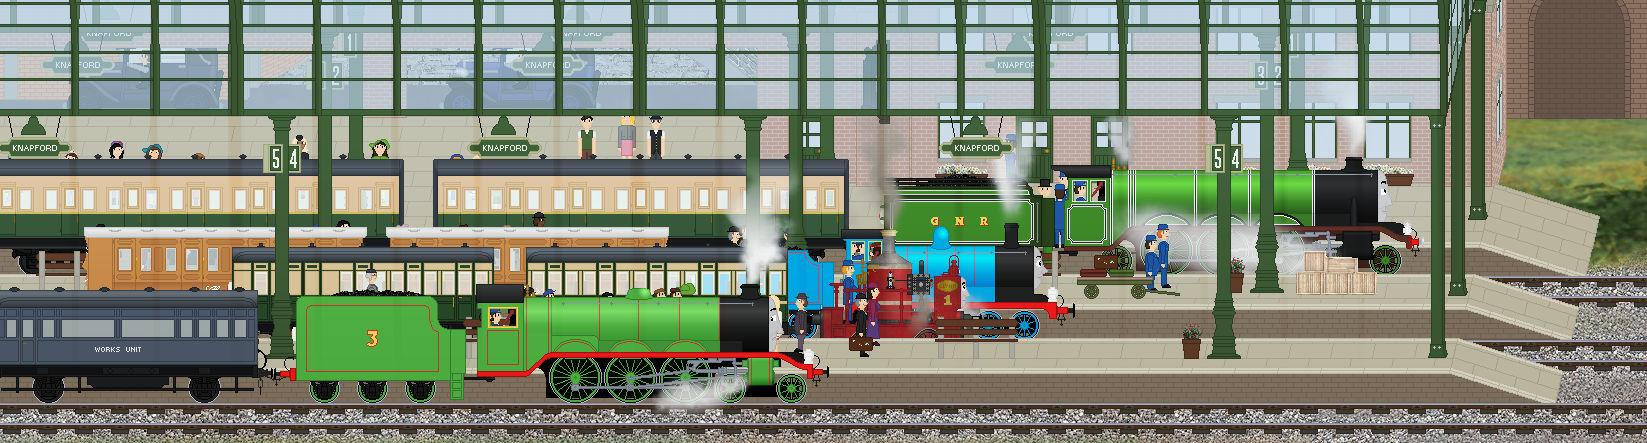 The New Express Engine